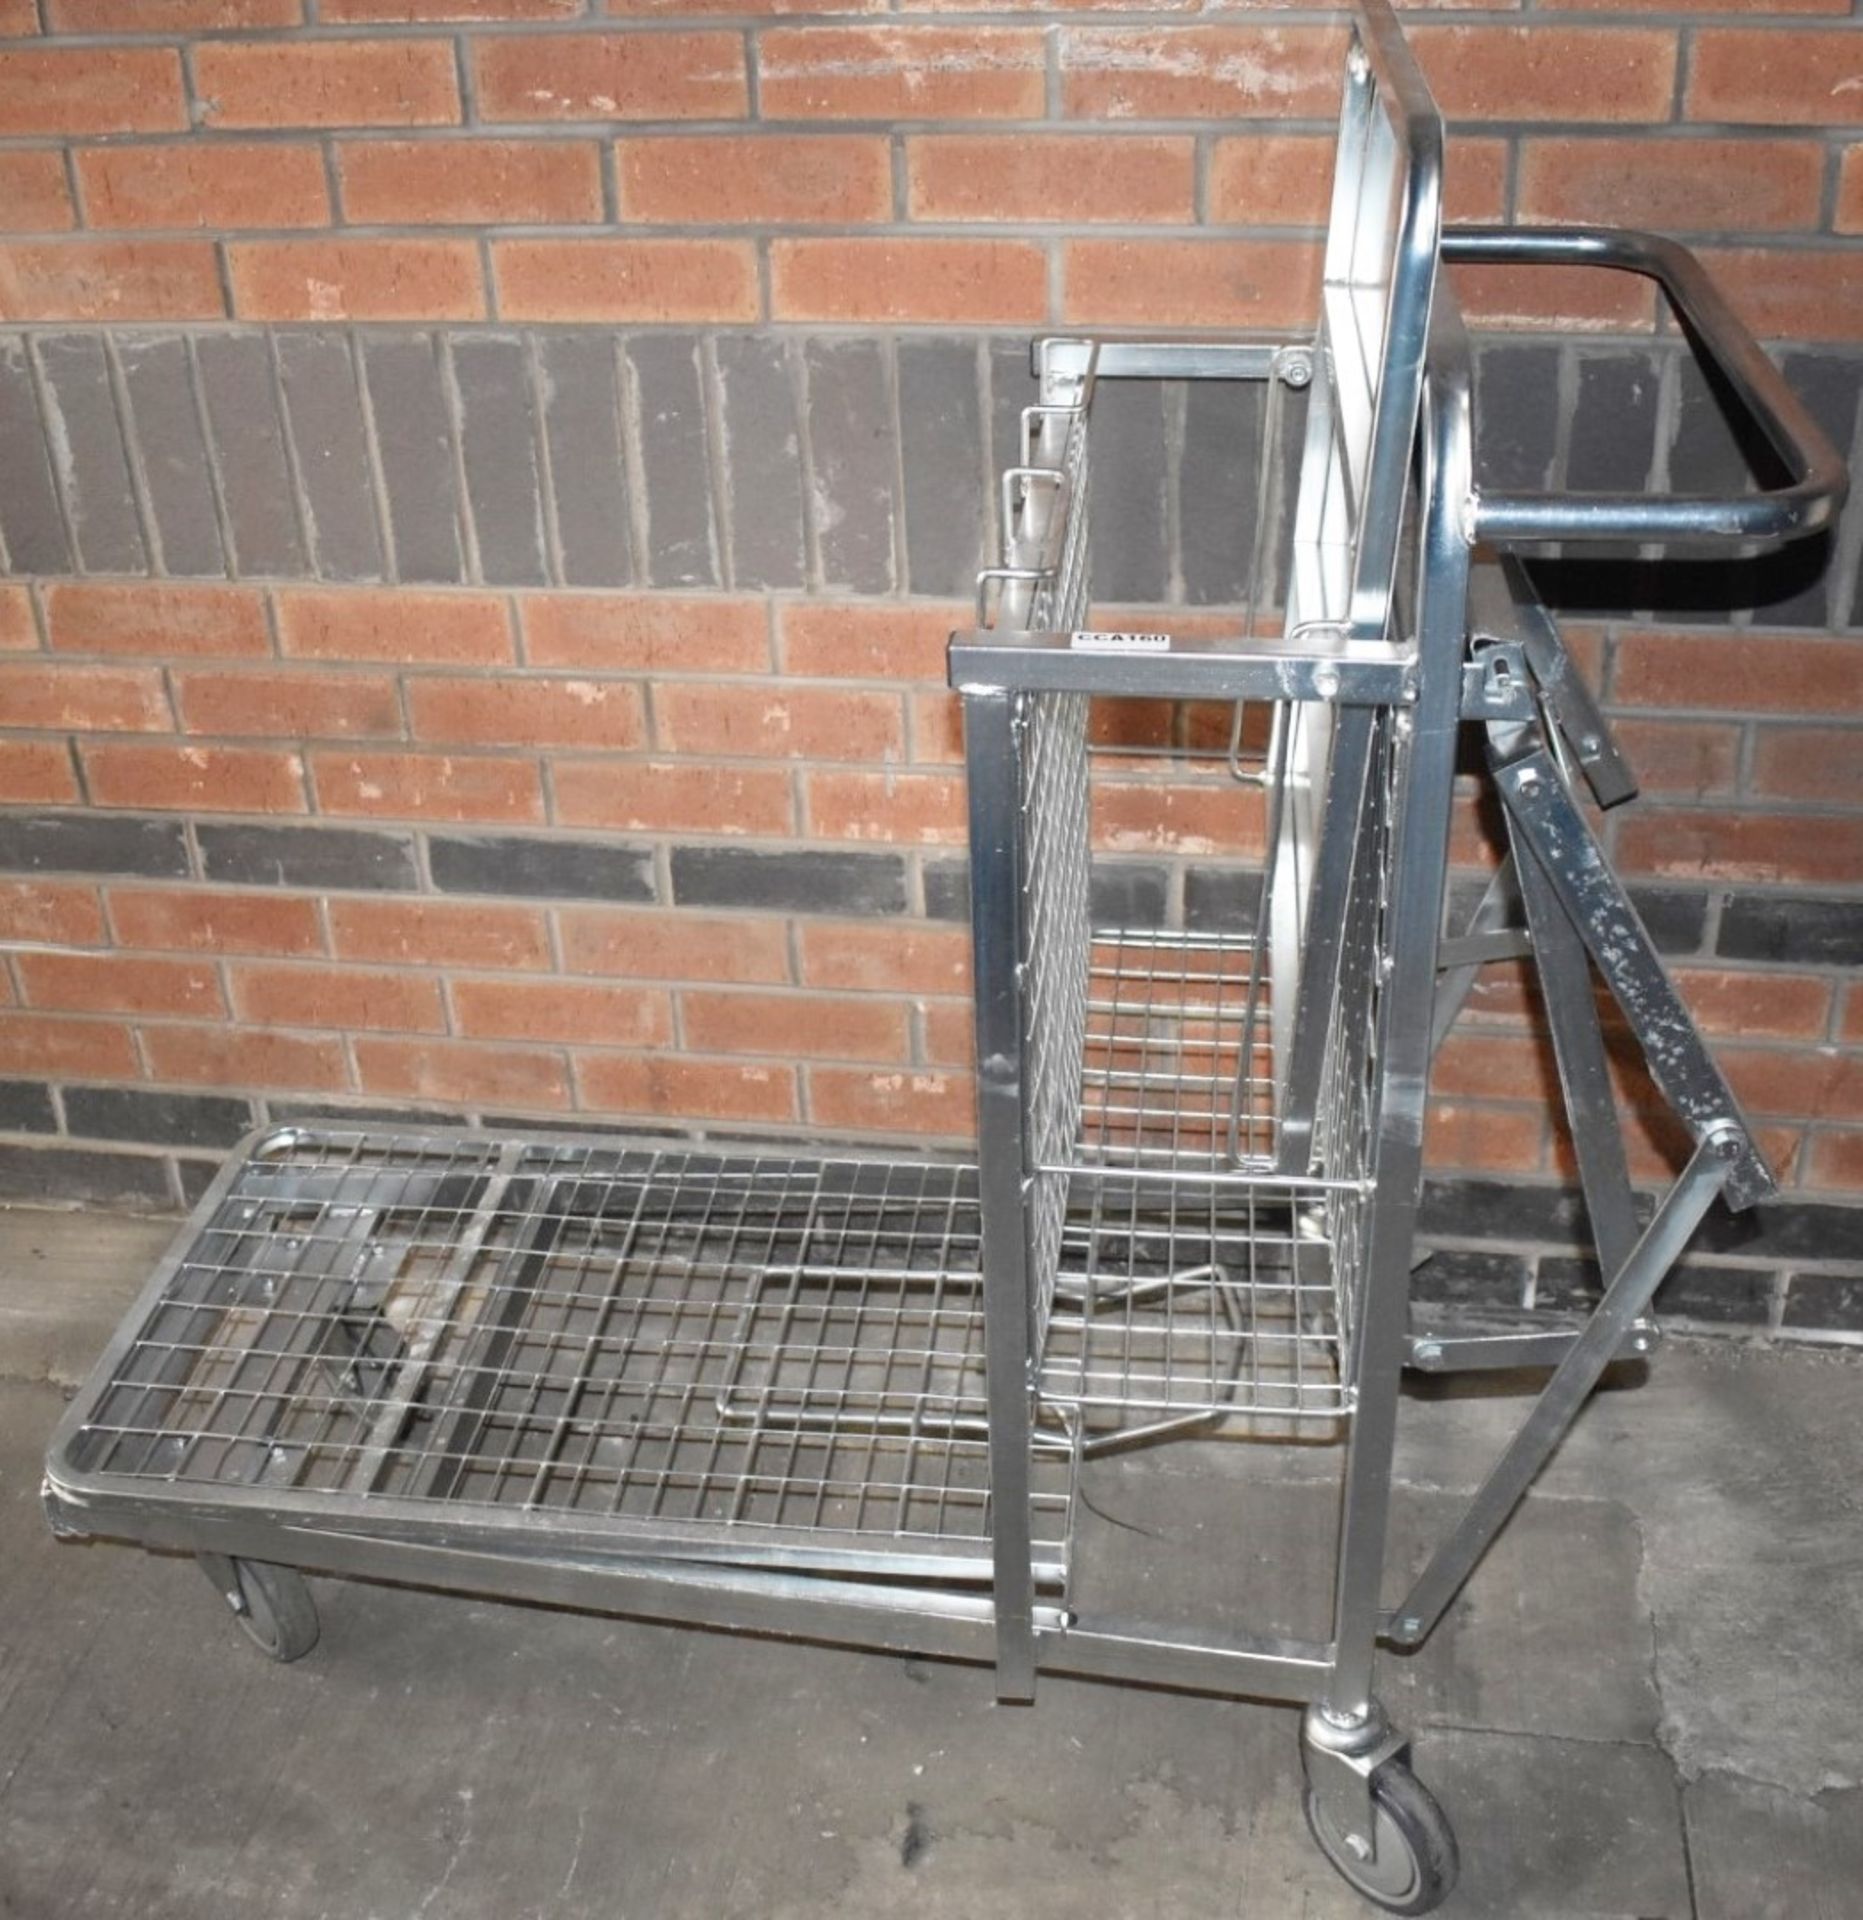 1 x Supermarket Retail Merchandising Trolley With Pull Out Step and Folding Shelf - Dimensions: - Image 6 of 9